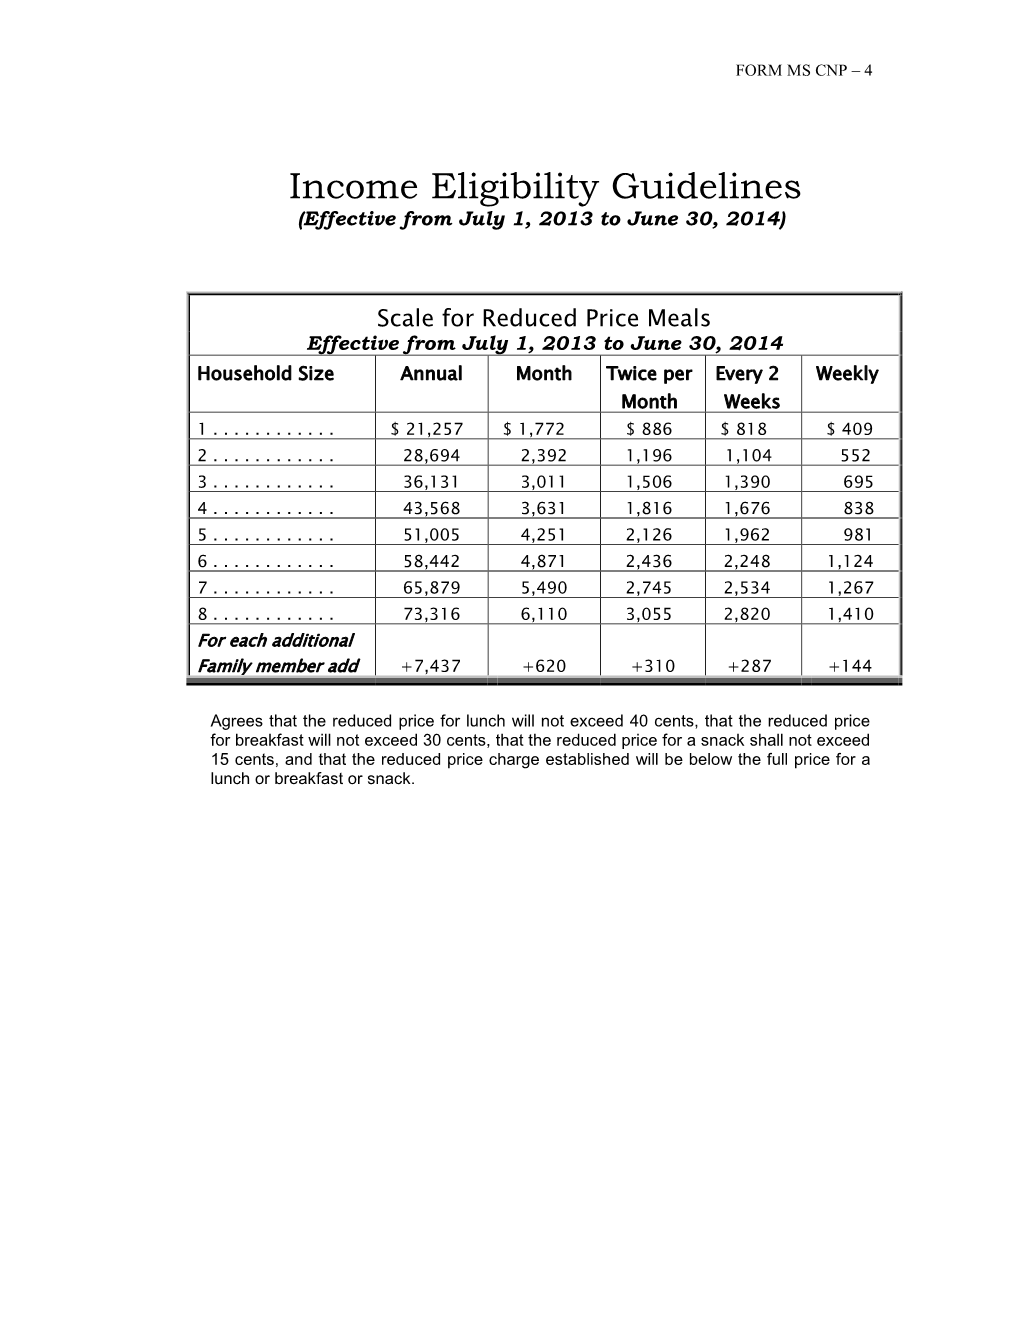 Income Eligibility Guidelines (Effective from July 1, 2013 to June 30, 2014)